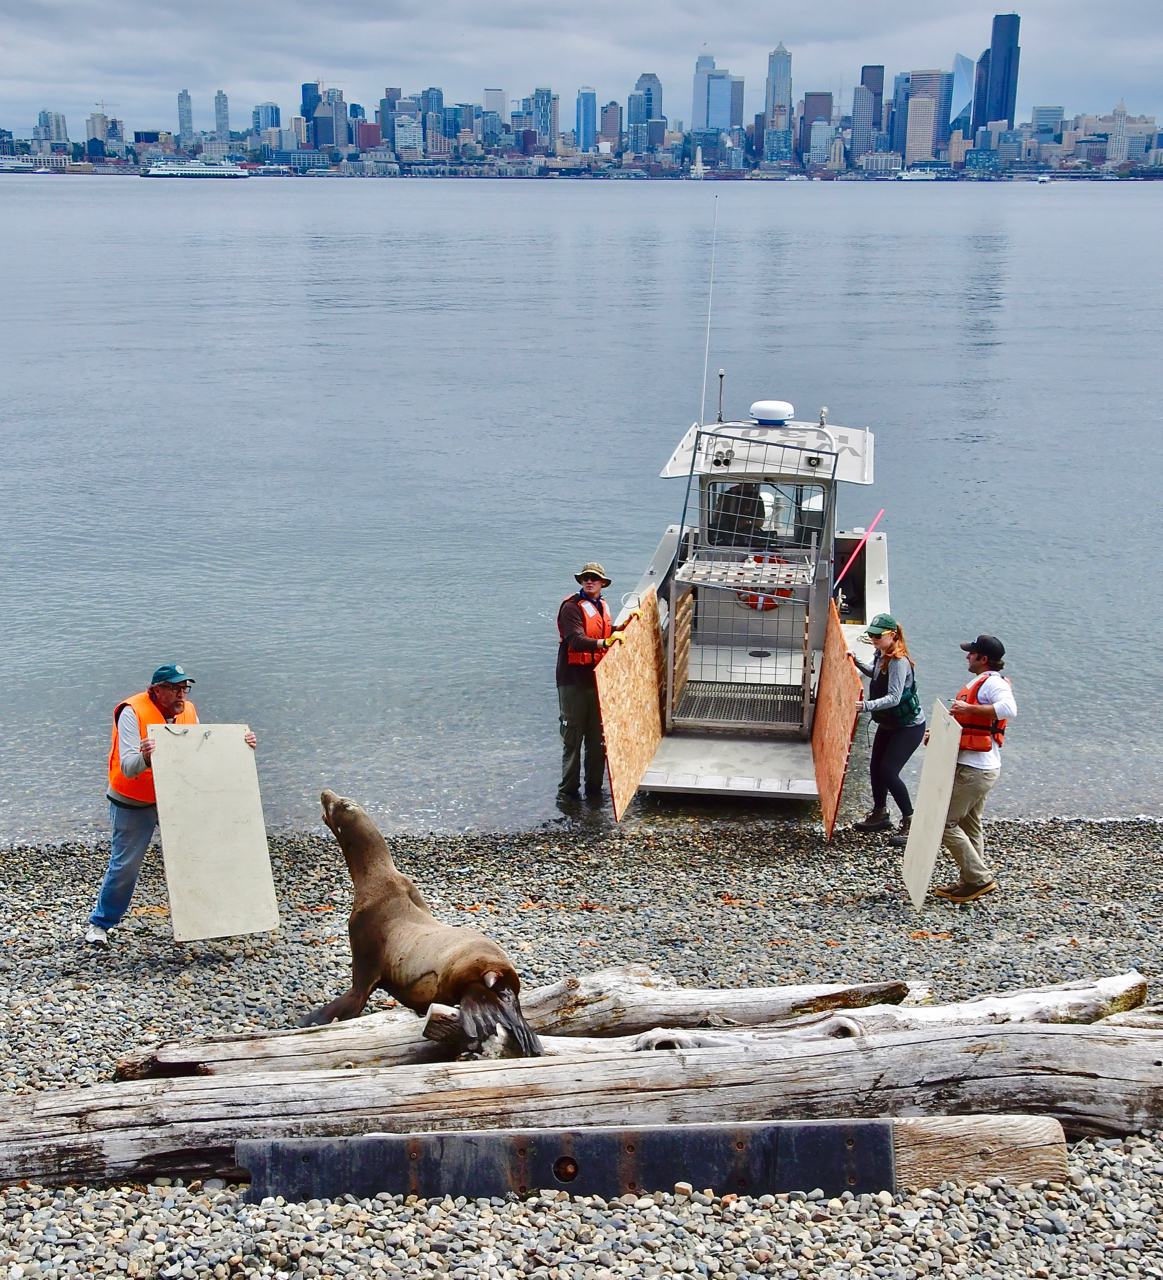 sea lion removal from beach at Seacrest Park